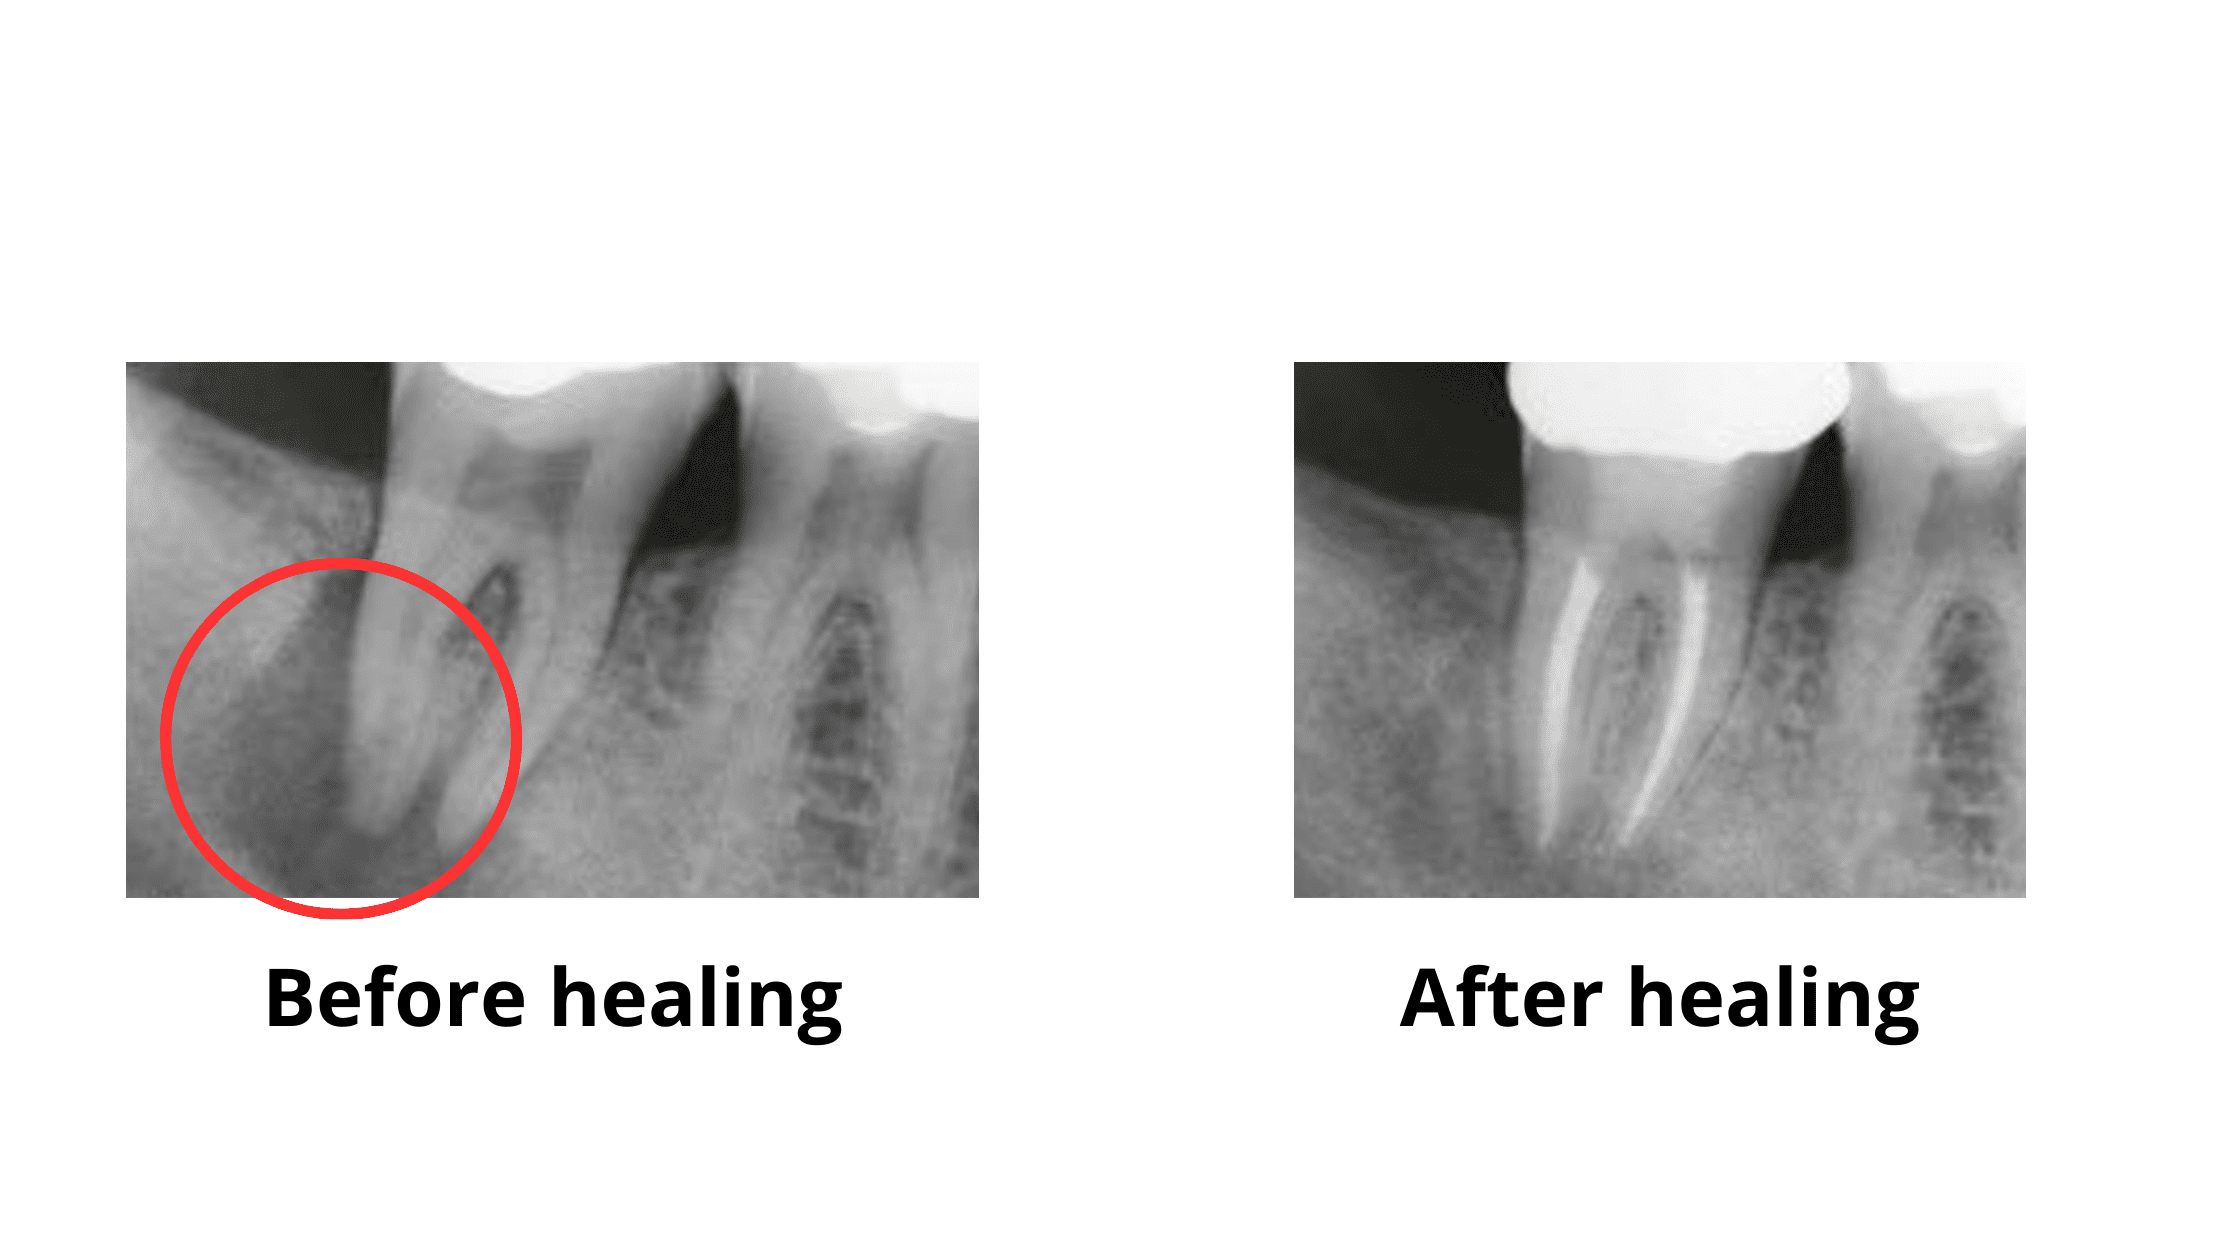 X-ray photos before and after root canal treatment: signs of healing